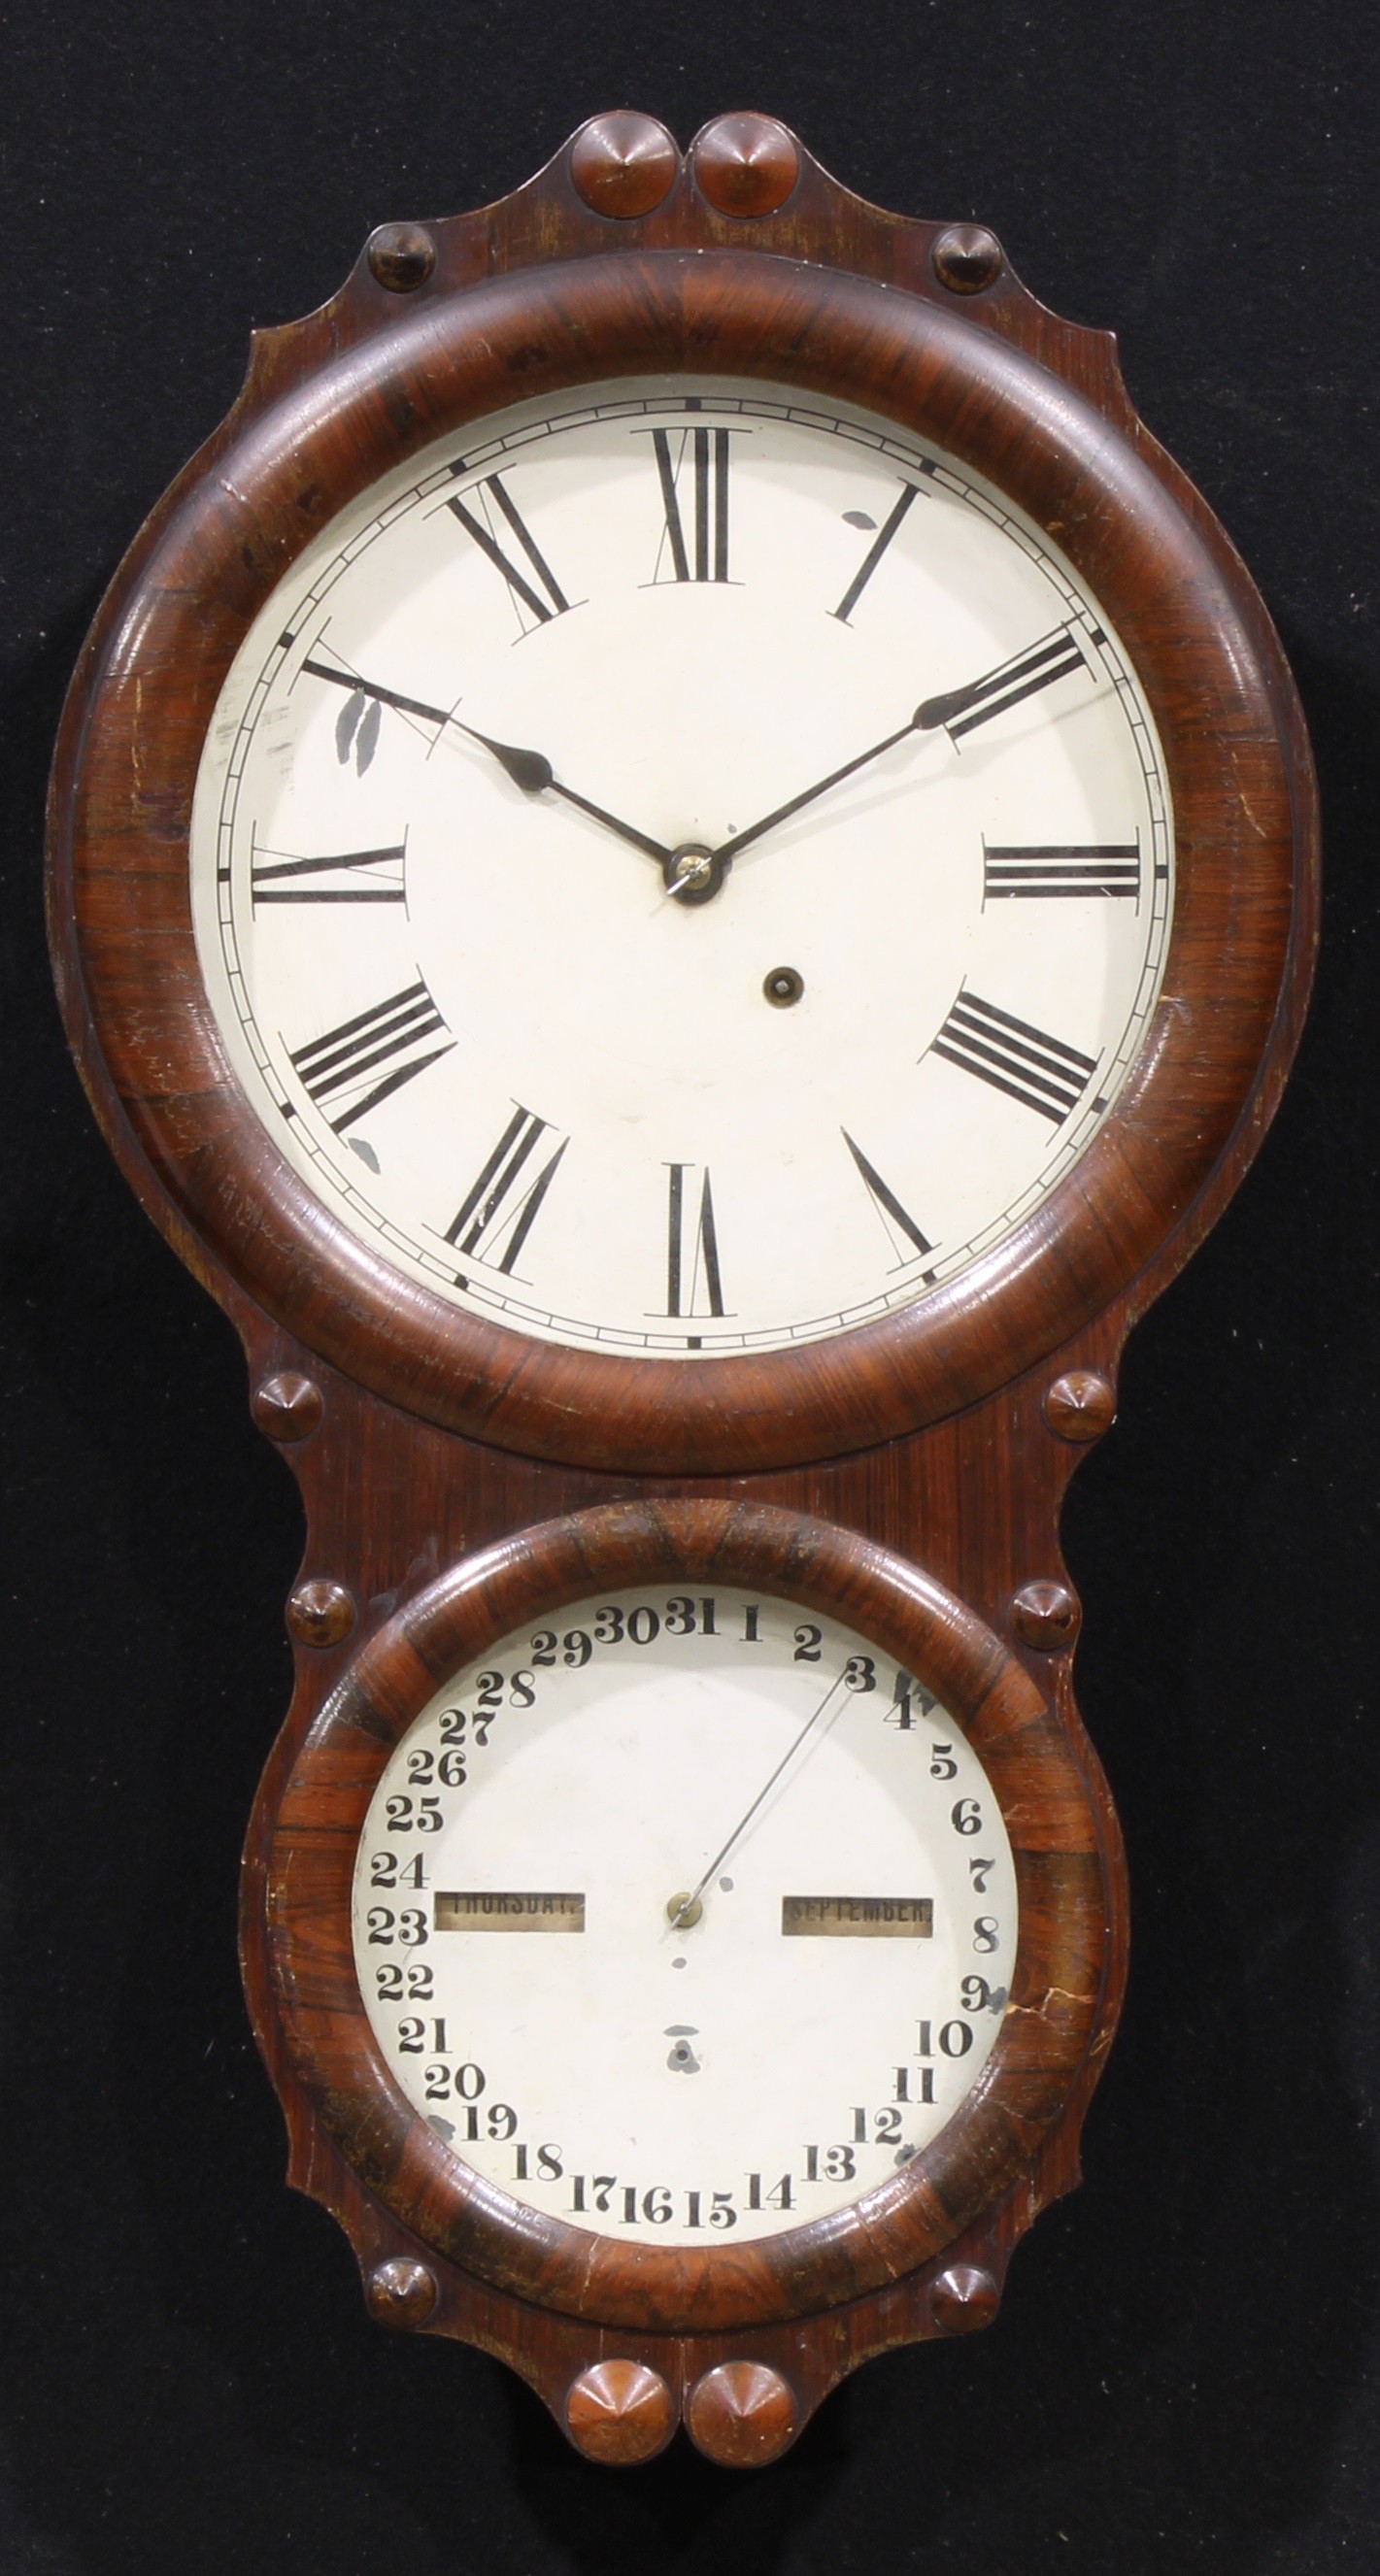 A 19th century American rosewood double-dial wall timepiece and calendar, by Seth Thomas Clock